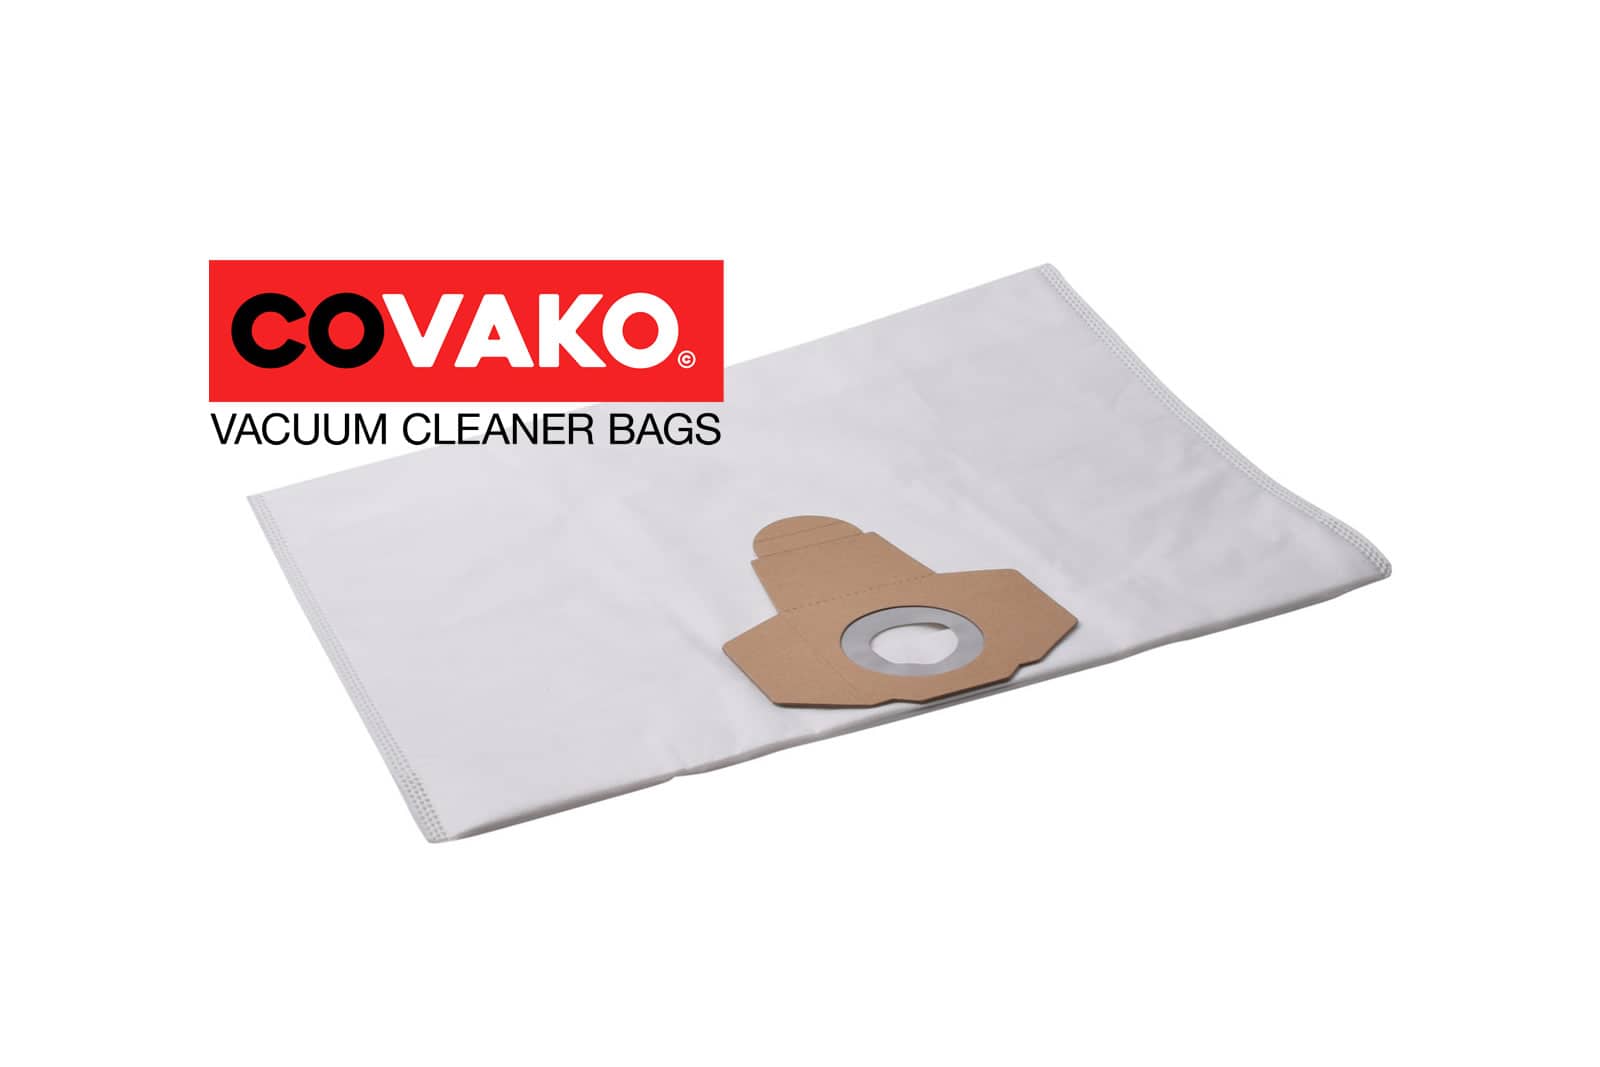 ewt Boxter 30 S / Synthesis - ewt vacuum cleaner bags